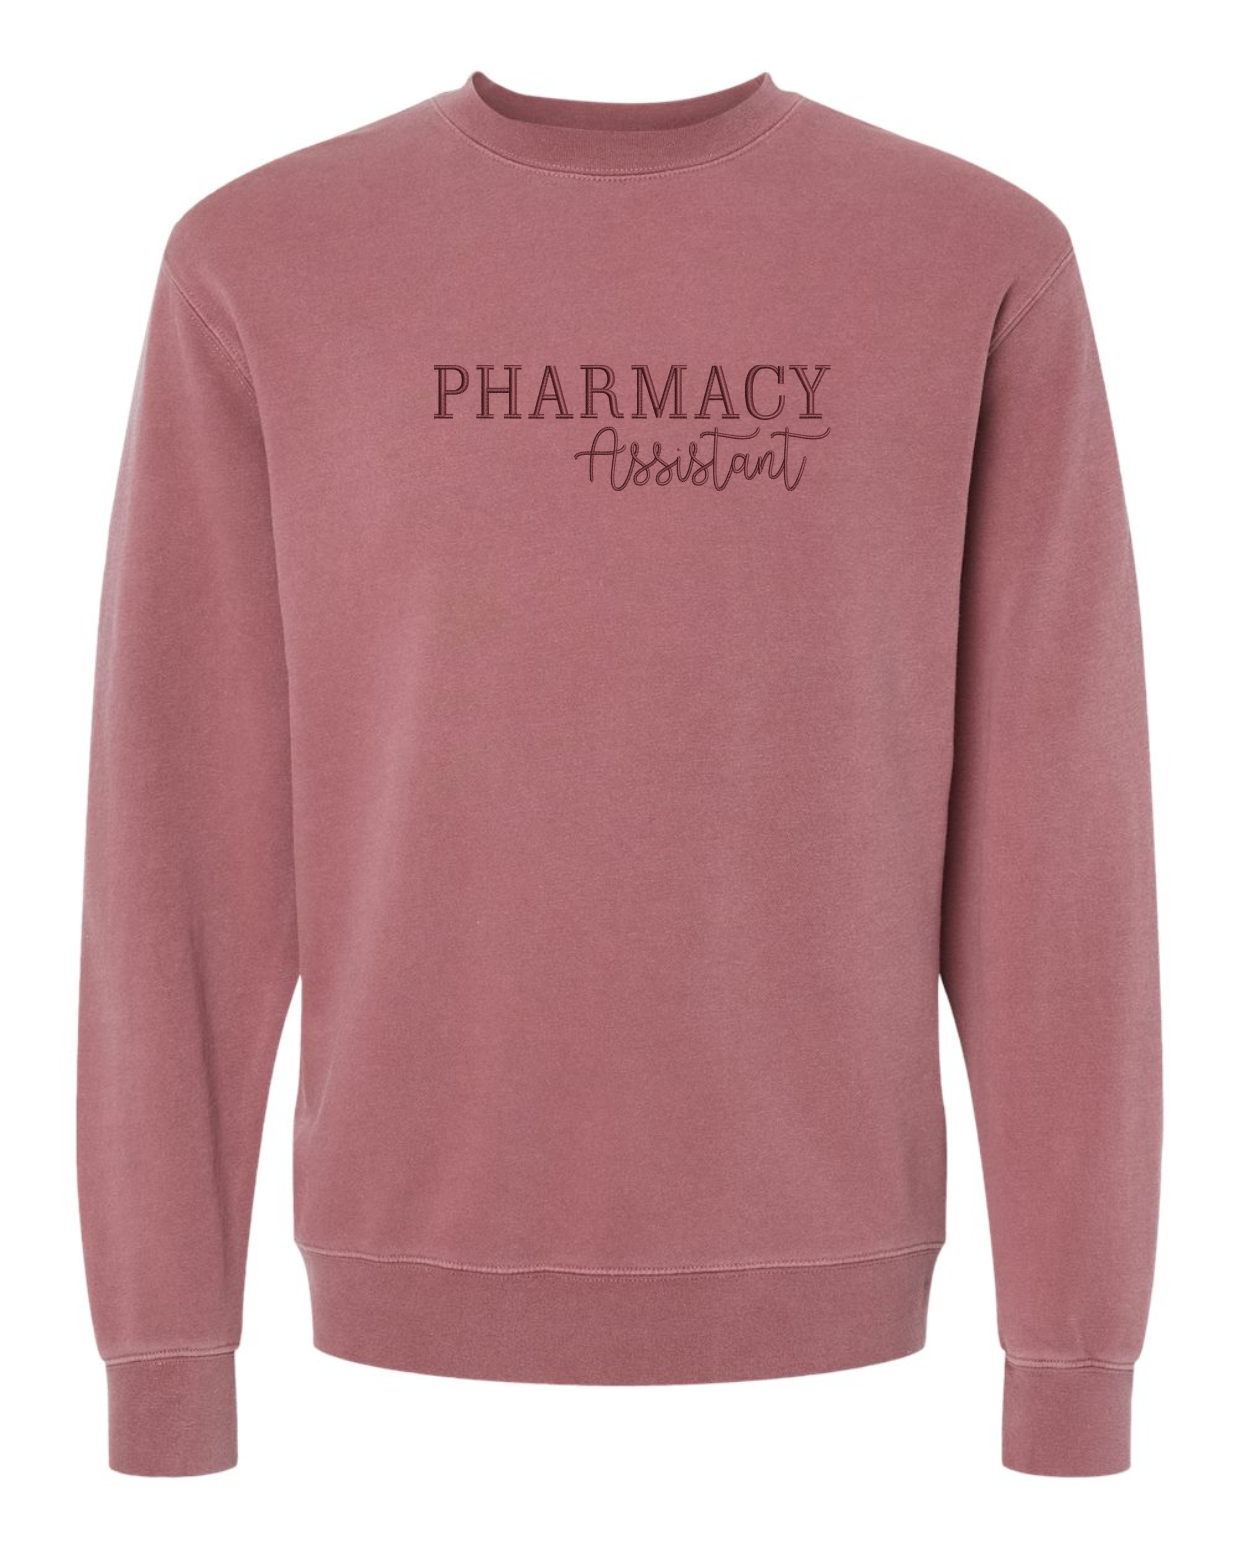 Pharmacy Assistant Embroidered Crewneck | Maroon